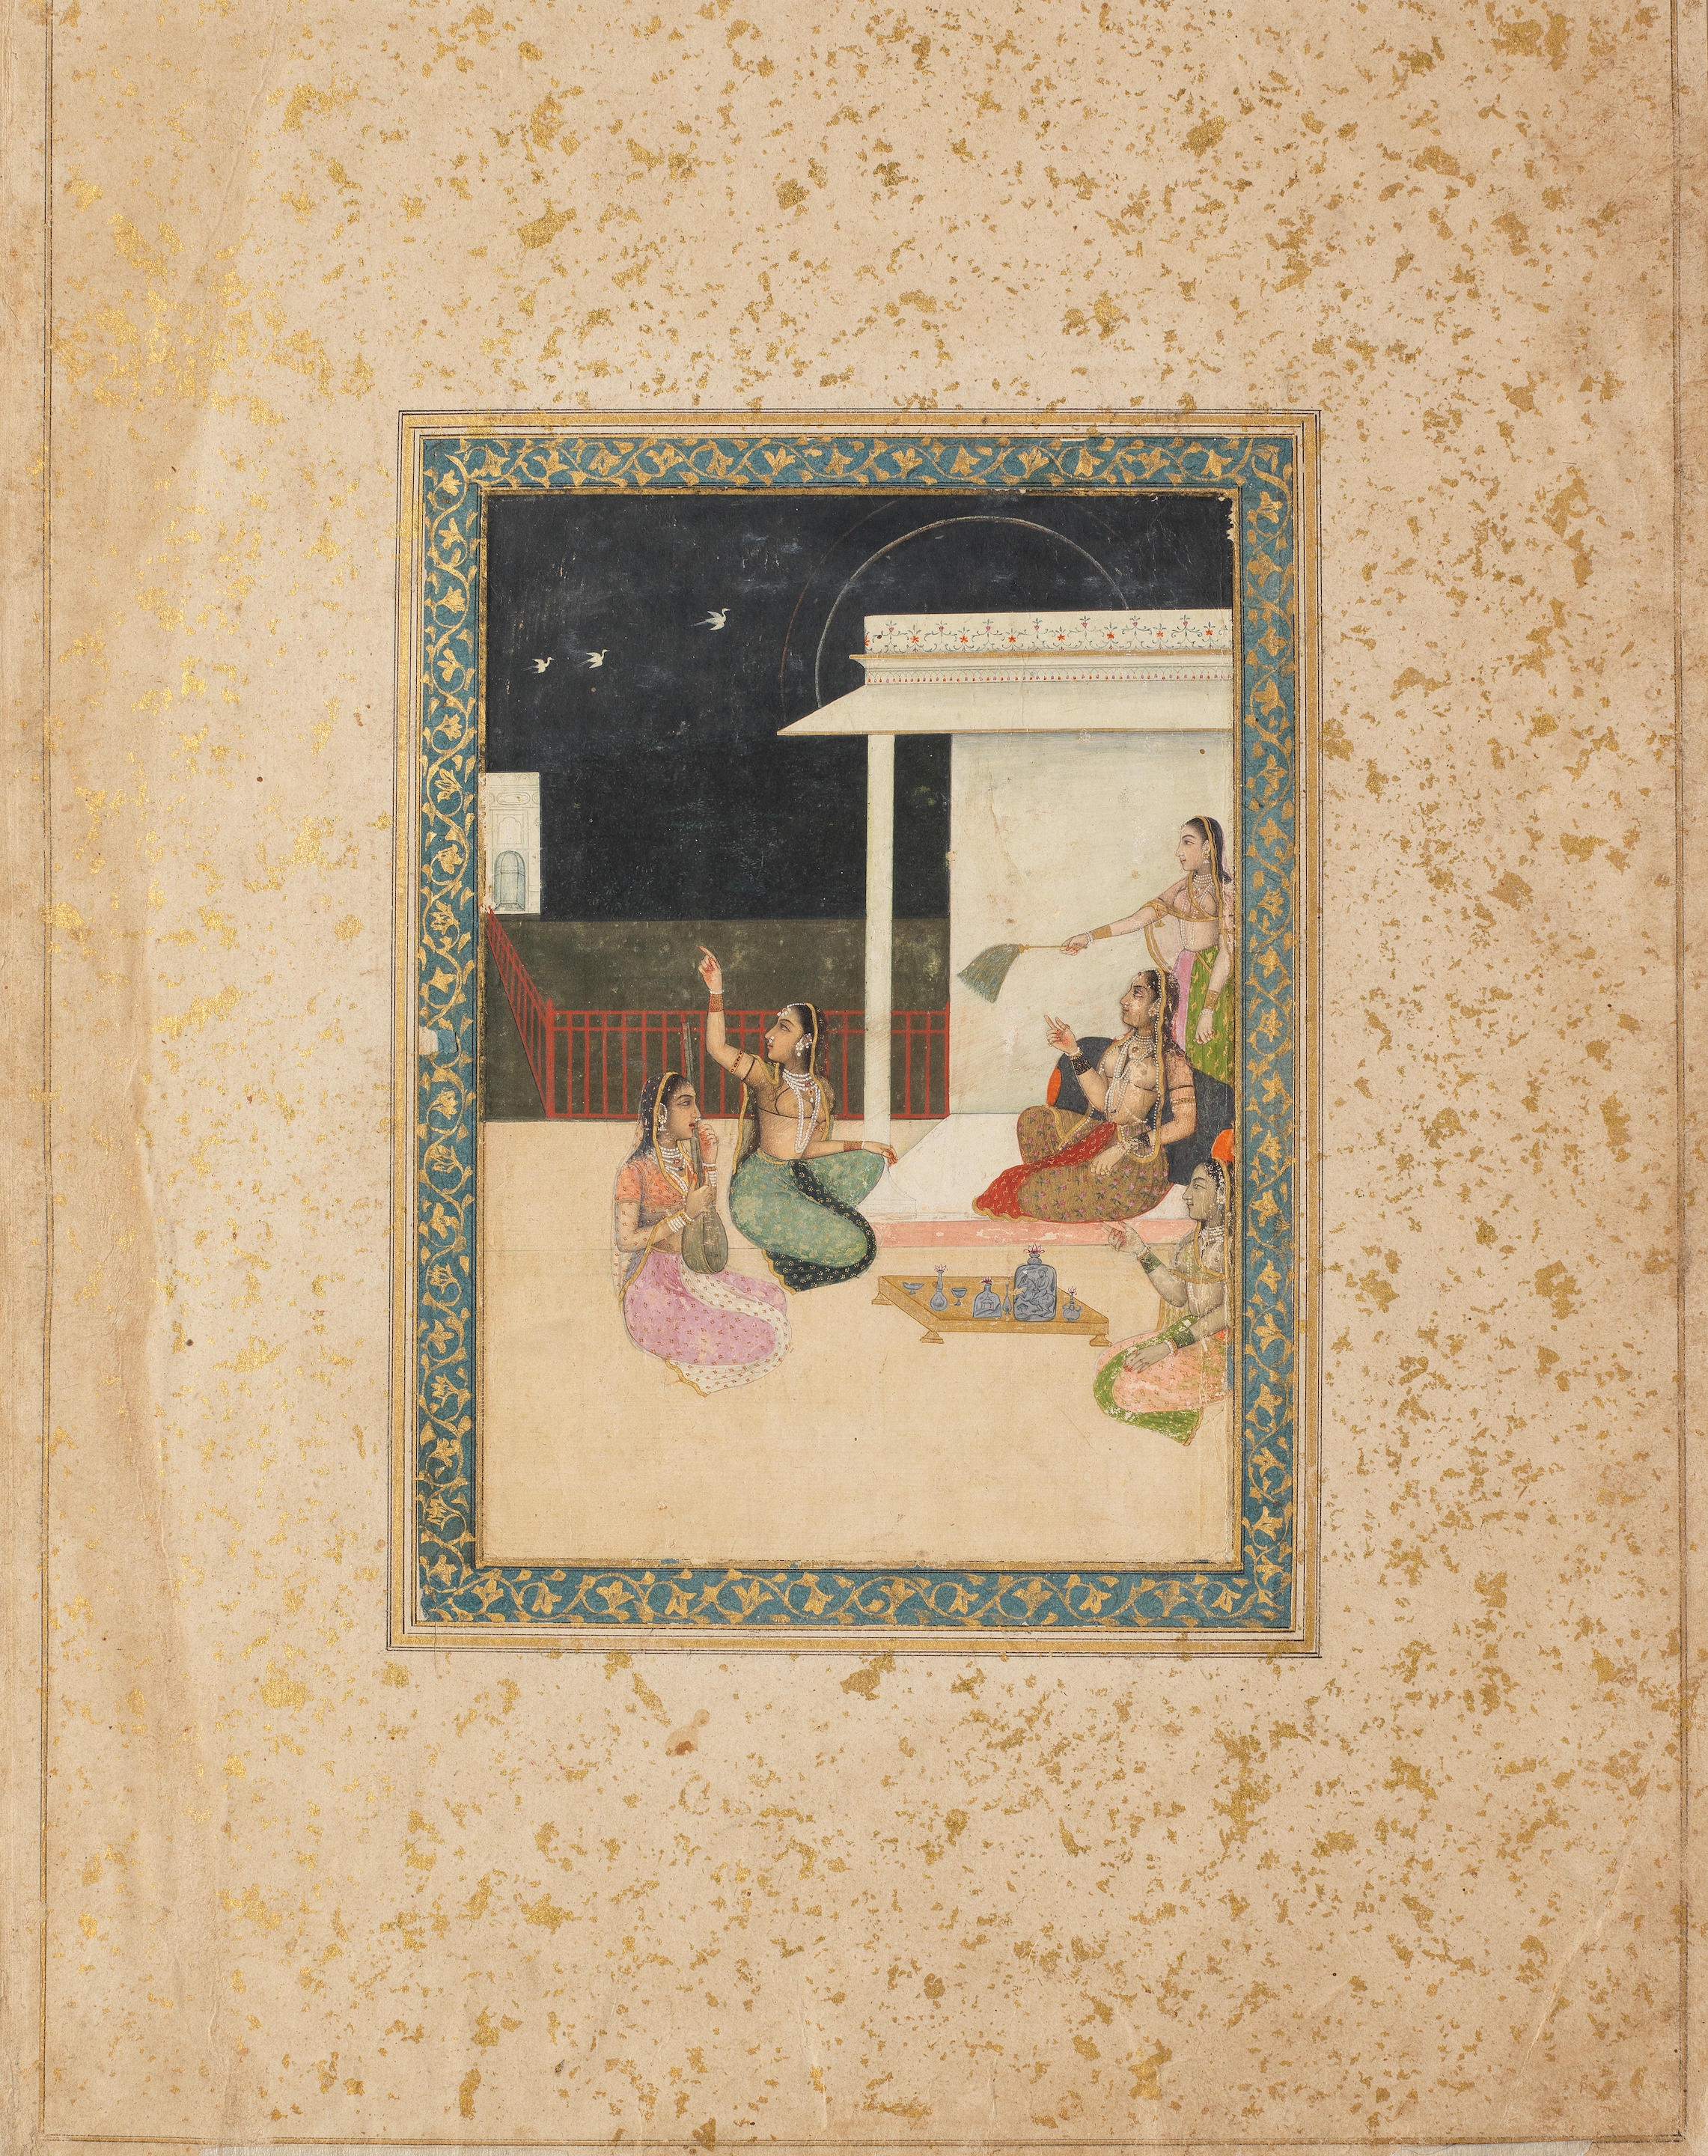 Maidens with female musicians and attendants seated on a terrace, watching the approach of geese, perhaps frightened by an approaching storm by Mughal School, 18th Century, circa 1760-80